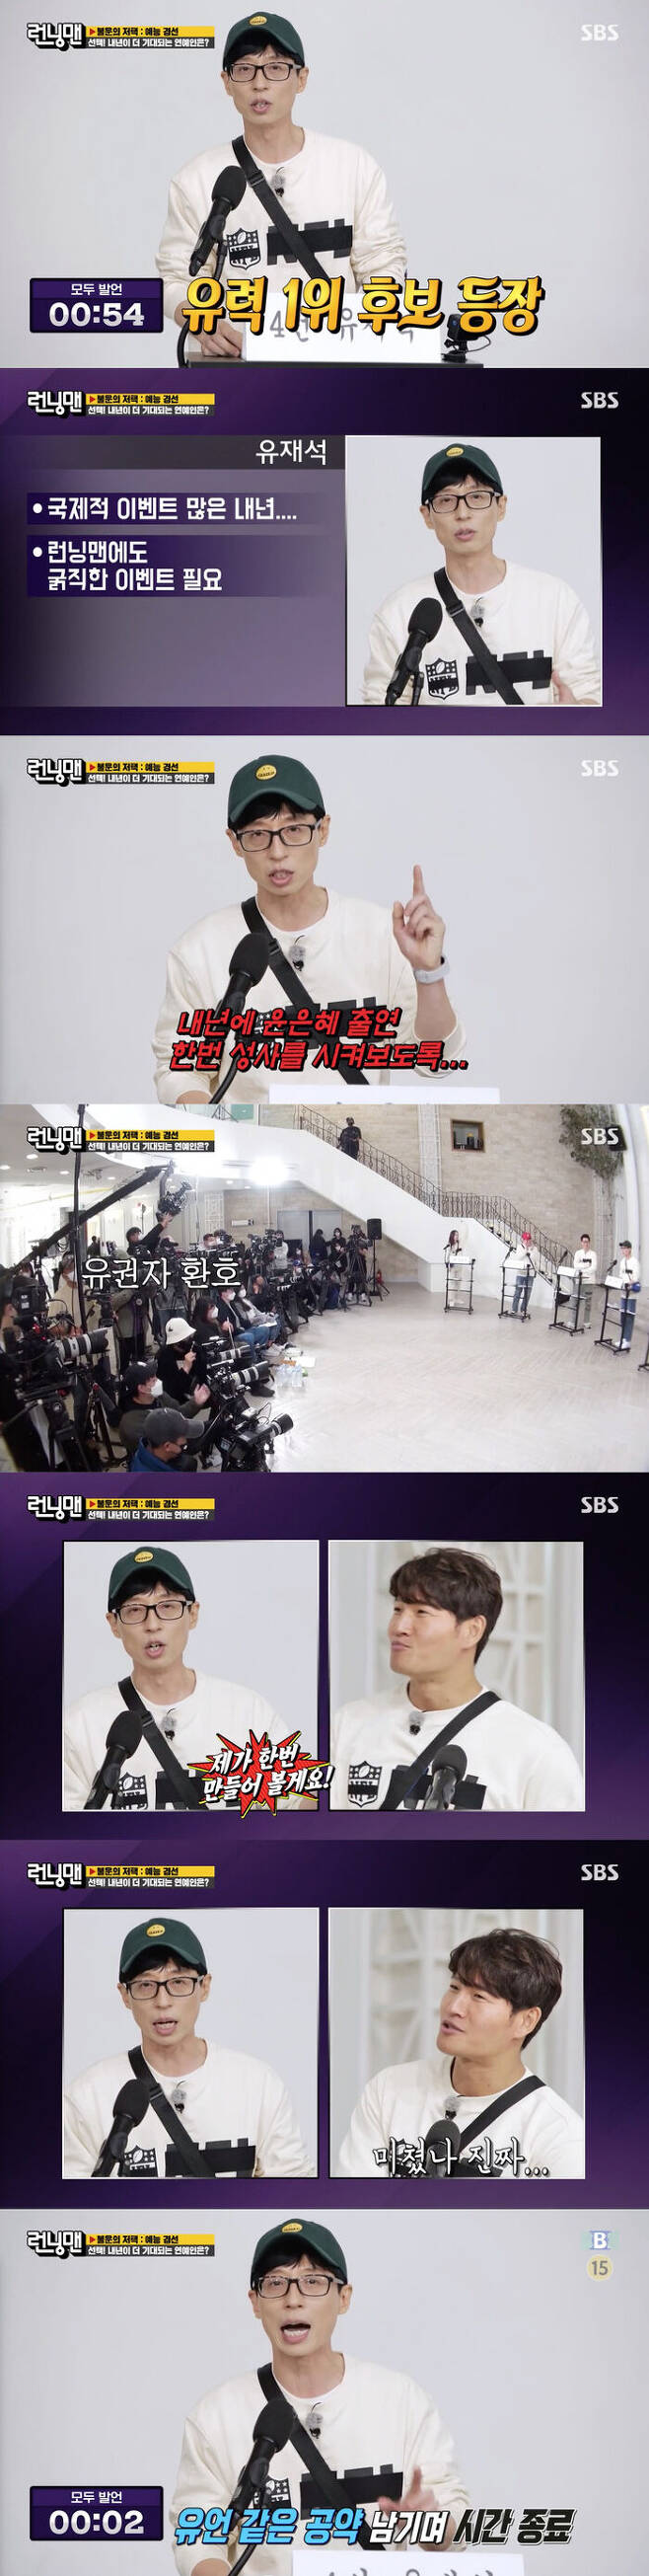 Yoo Jae-Suk put forward a Makgang Committee.On SBS Running Man broadcasted on the 31st, we held an election for entertainers expected next year.On the show, the members ran for the An Celebrity Expected for Next Year race, which all appealed to the voters, the production crew, with their remarks.Yoo Jae-Suk said, You can trust me next year as well as this year and last year.There are many international sports events such as the Winter Olympics and the World Cup next year, and we should make big issues well, he said.So Yoo Jae-Suk said, So I will try to make a appearance for Yoon Eun-hye next year.Many big people should do One, he said, walking the Yoon Eun-hye appearance committee to cheer the voters.Kim Jong Kook, who saw this, said, I think Im crazy. So, Yoo Jae-Suk said, You see, I really risk my life.I will also risk my life to keep talking about grace, he said. Expect my strength next year. 